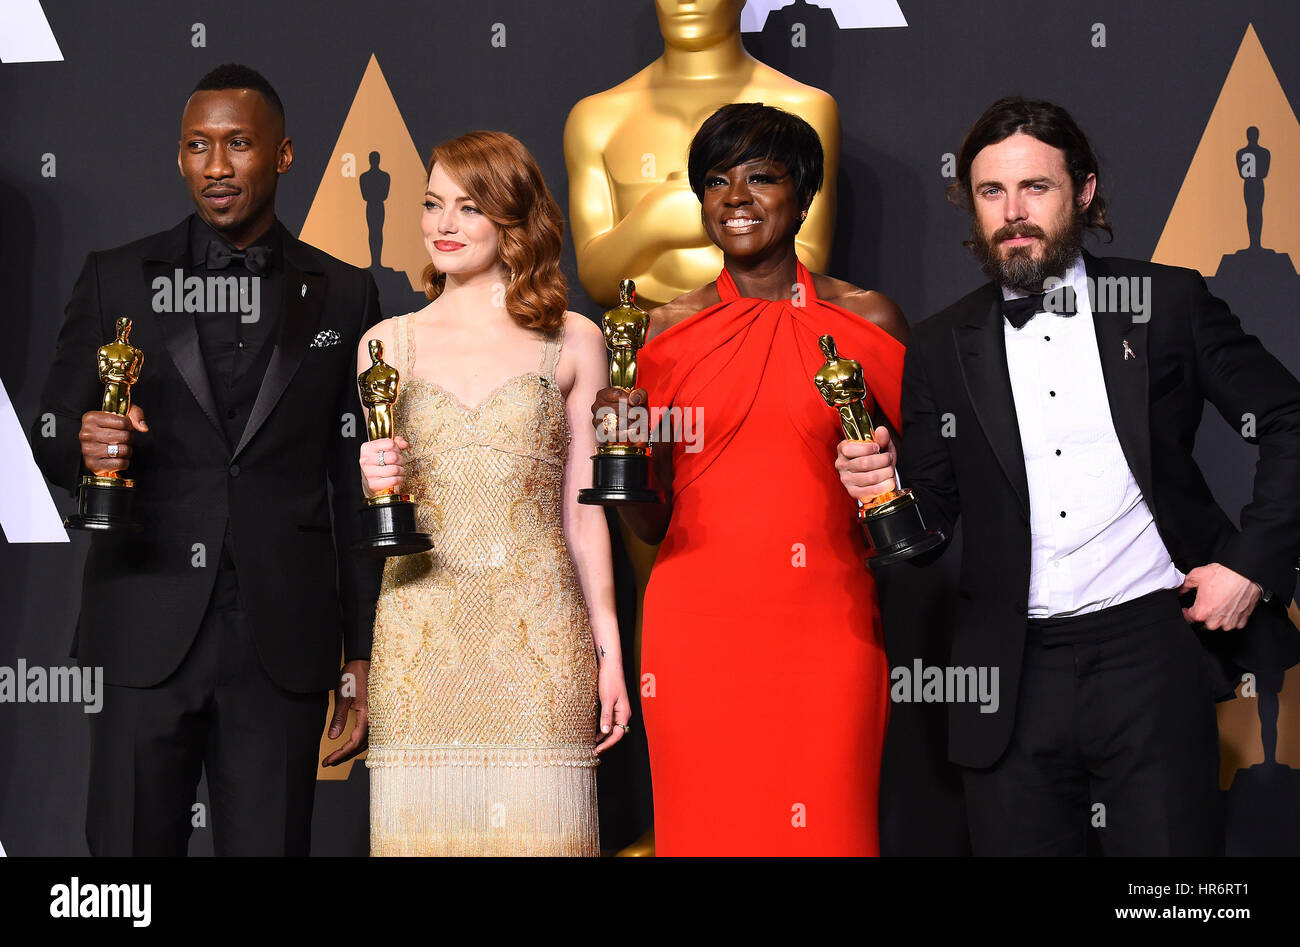 Hollywood, California, USA. 26th Feb, 2017. Mahershala Ali, Emma Stone, Viola Davis and Casey Affleck in the press room at the 89th Annual Academy Awards at the Dolby Theatre. Credit: Lisa O'Connor/ZUMA Wire/Alamy Live News Stock Photo